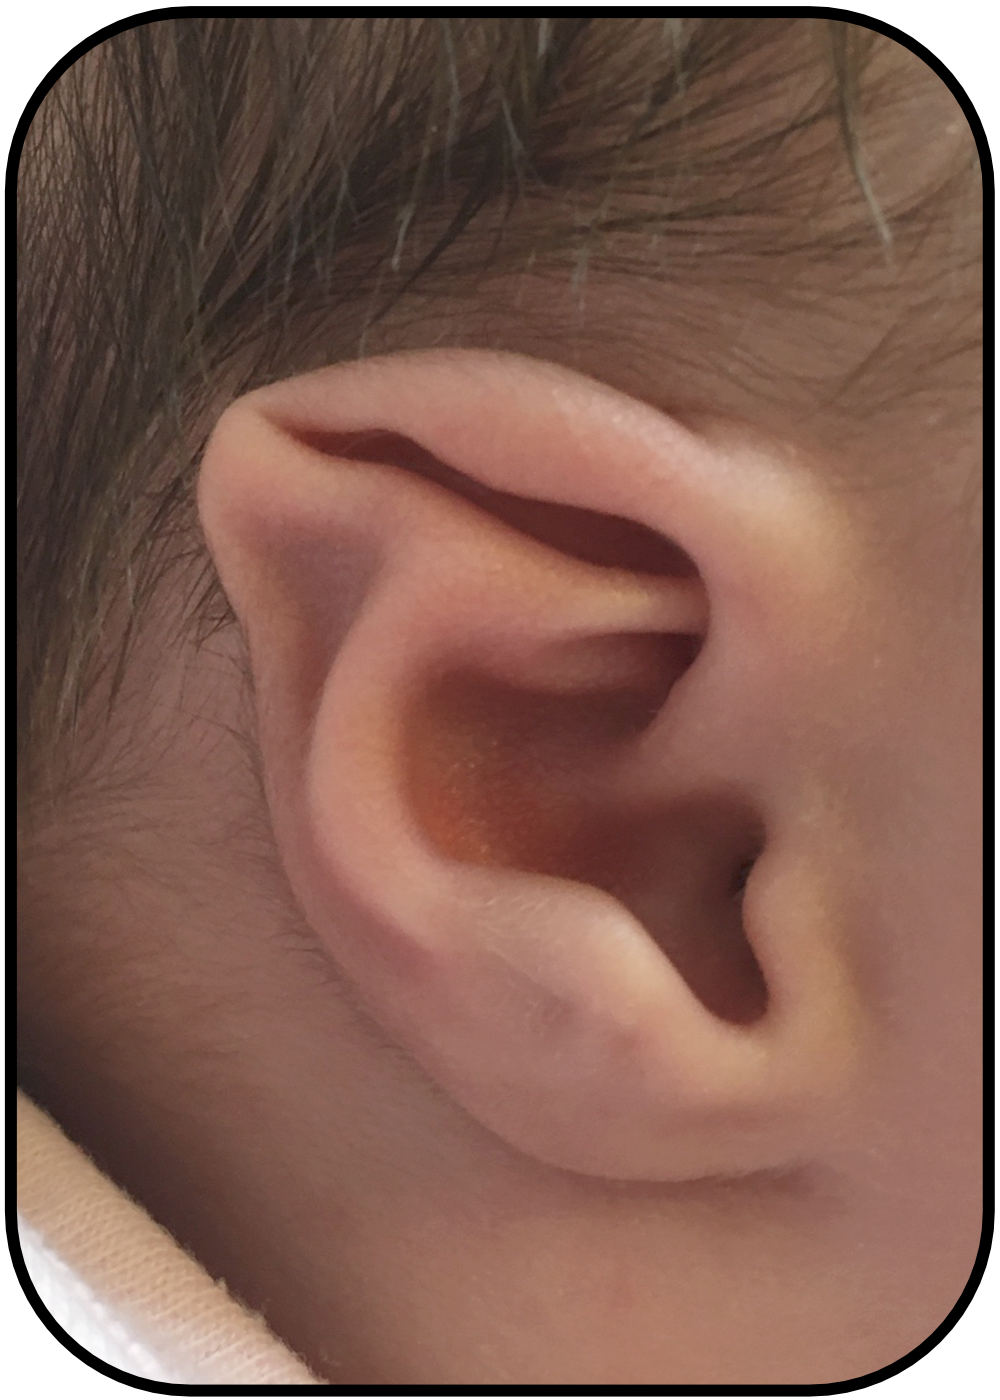 baby with inverted ear